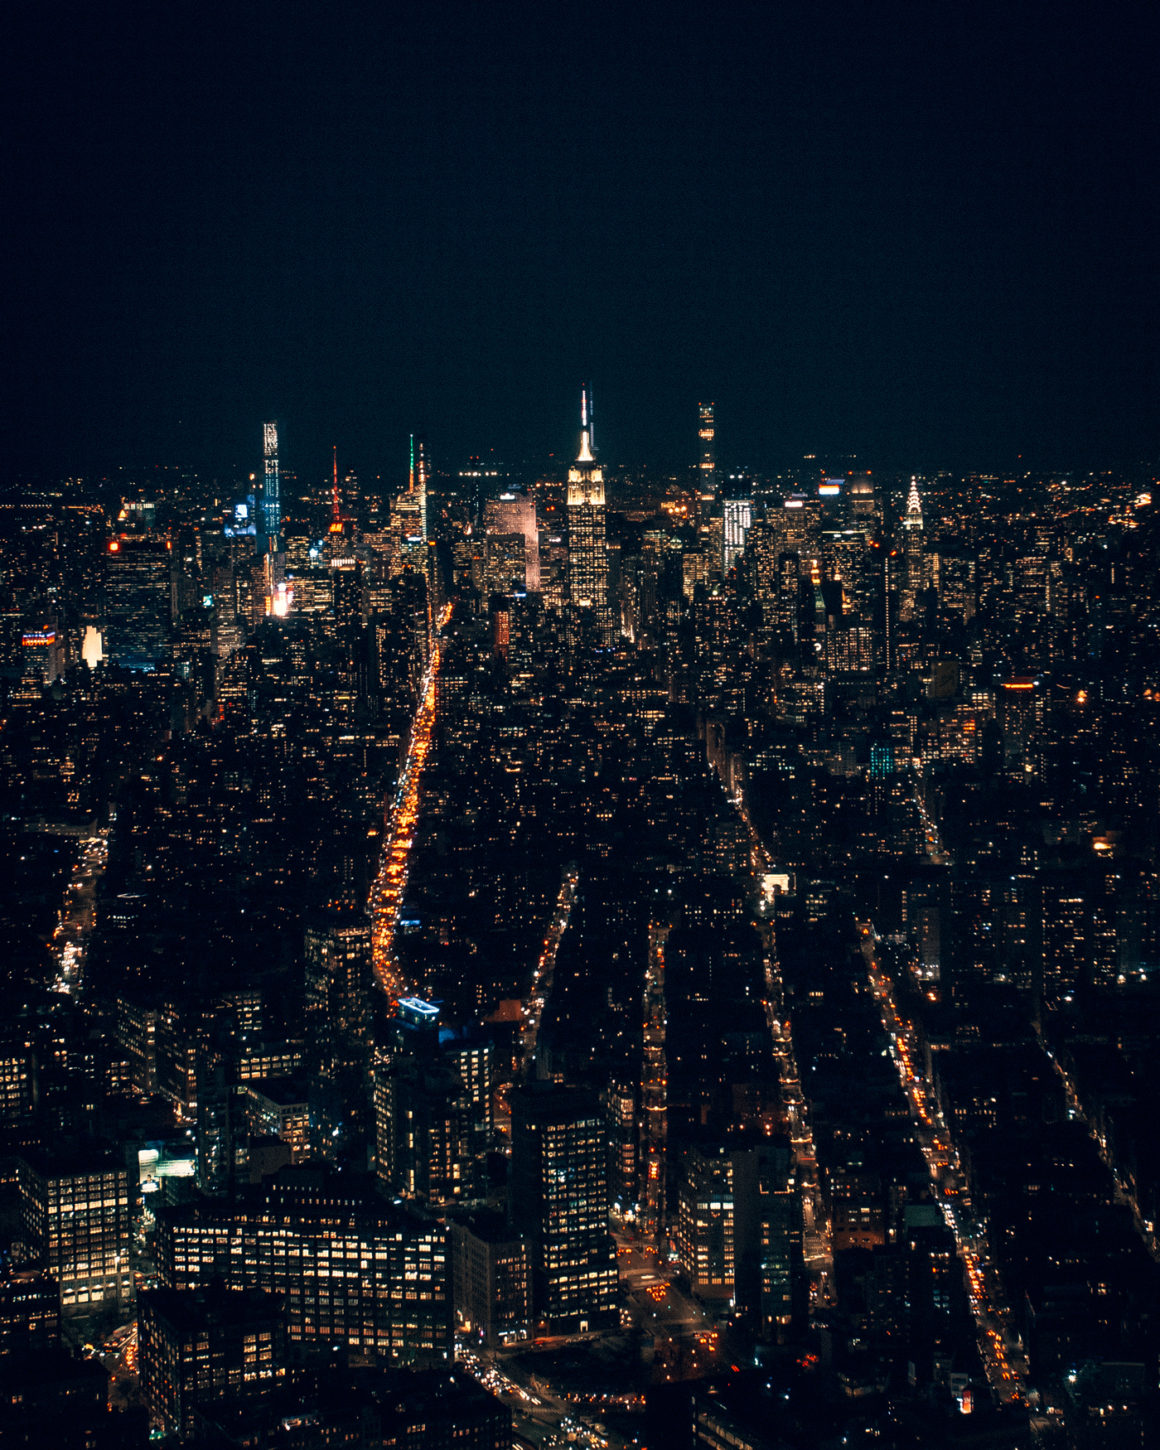 New York for Digital Nomads: The Skyline at Night